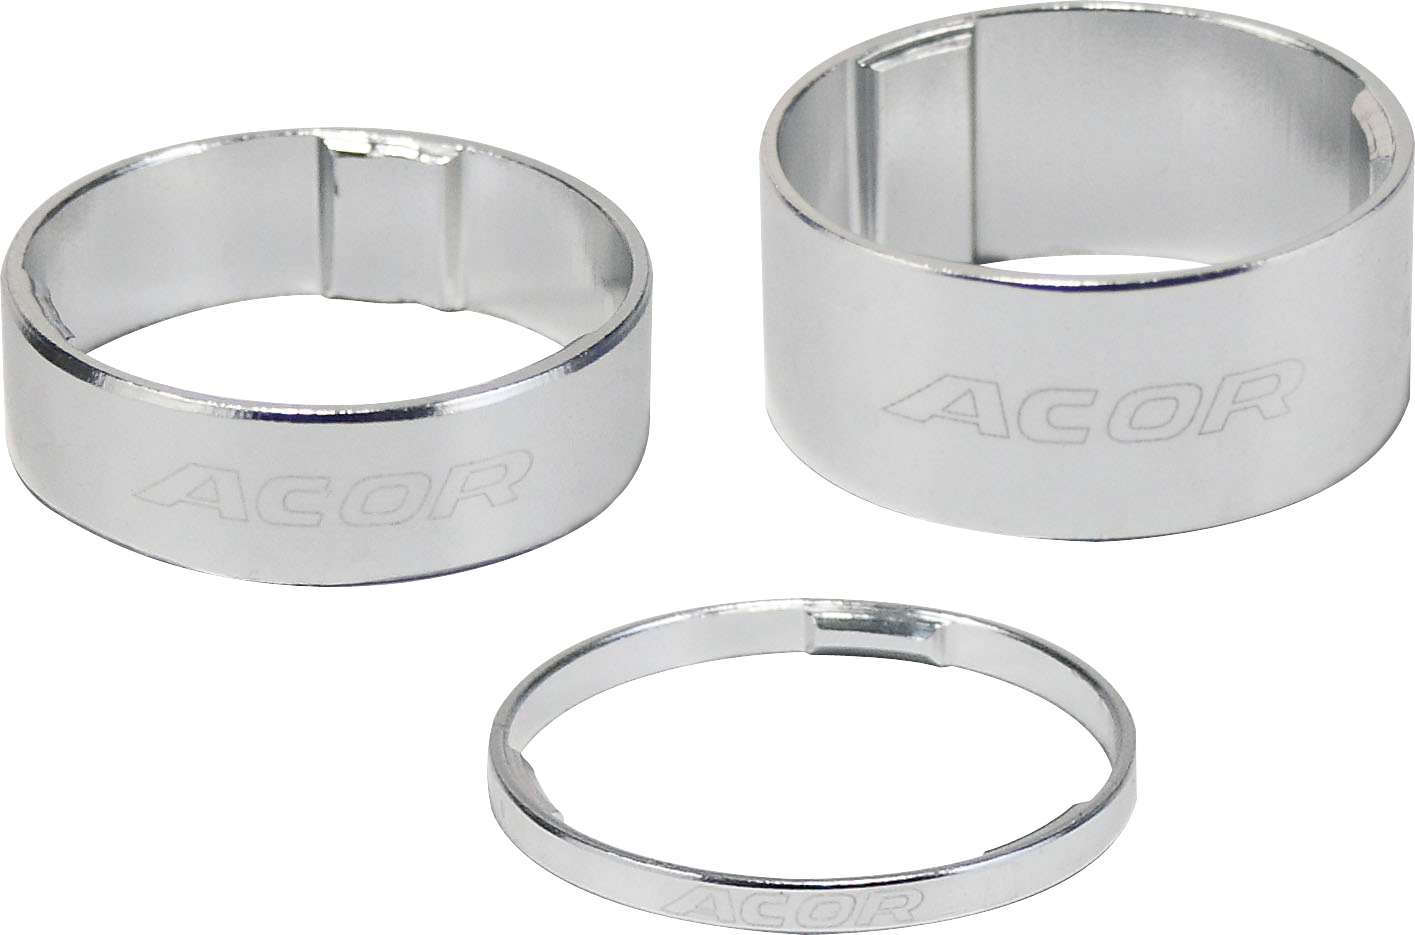 ASM271057 Acor 5mm Silver 1.1/8" Alloy Spacers (Bag Of 10)